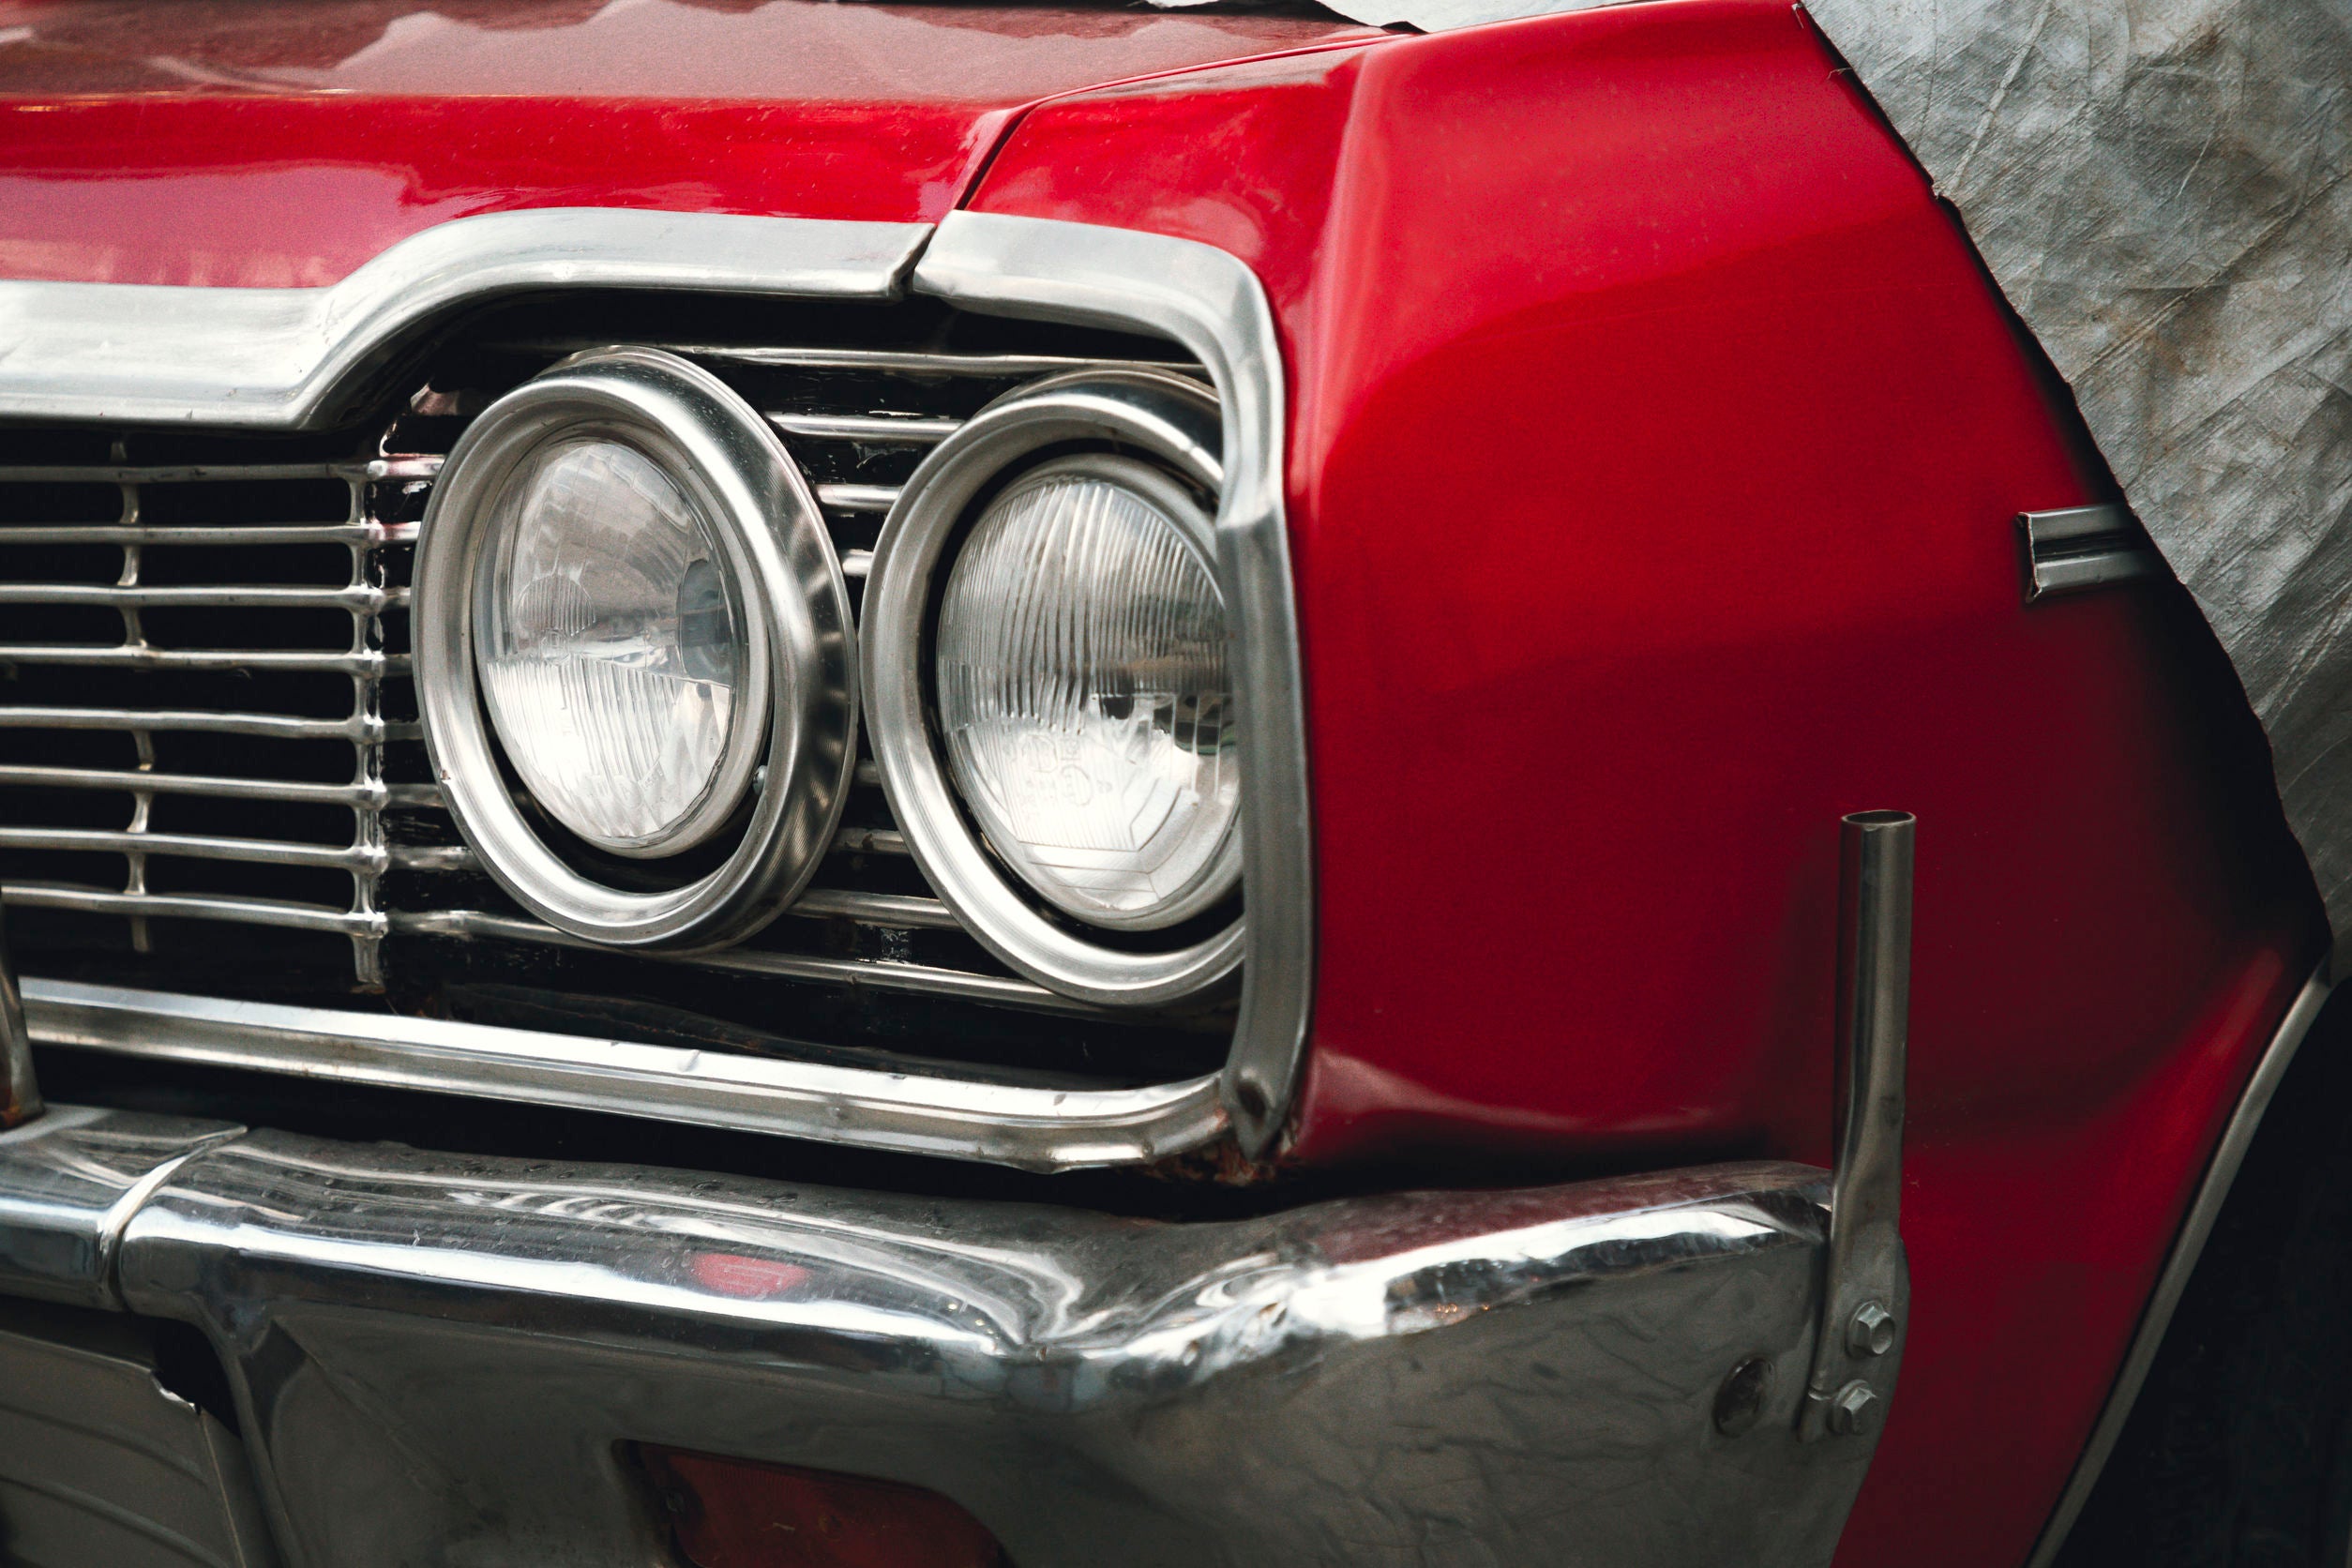 How to Store Your Classic Car for Fall and Winter